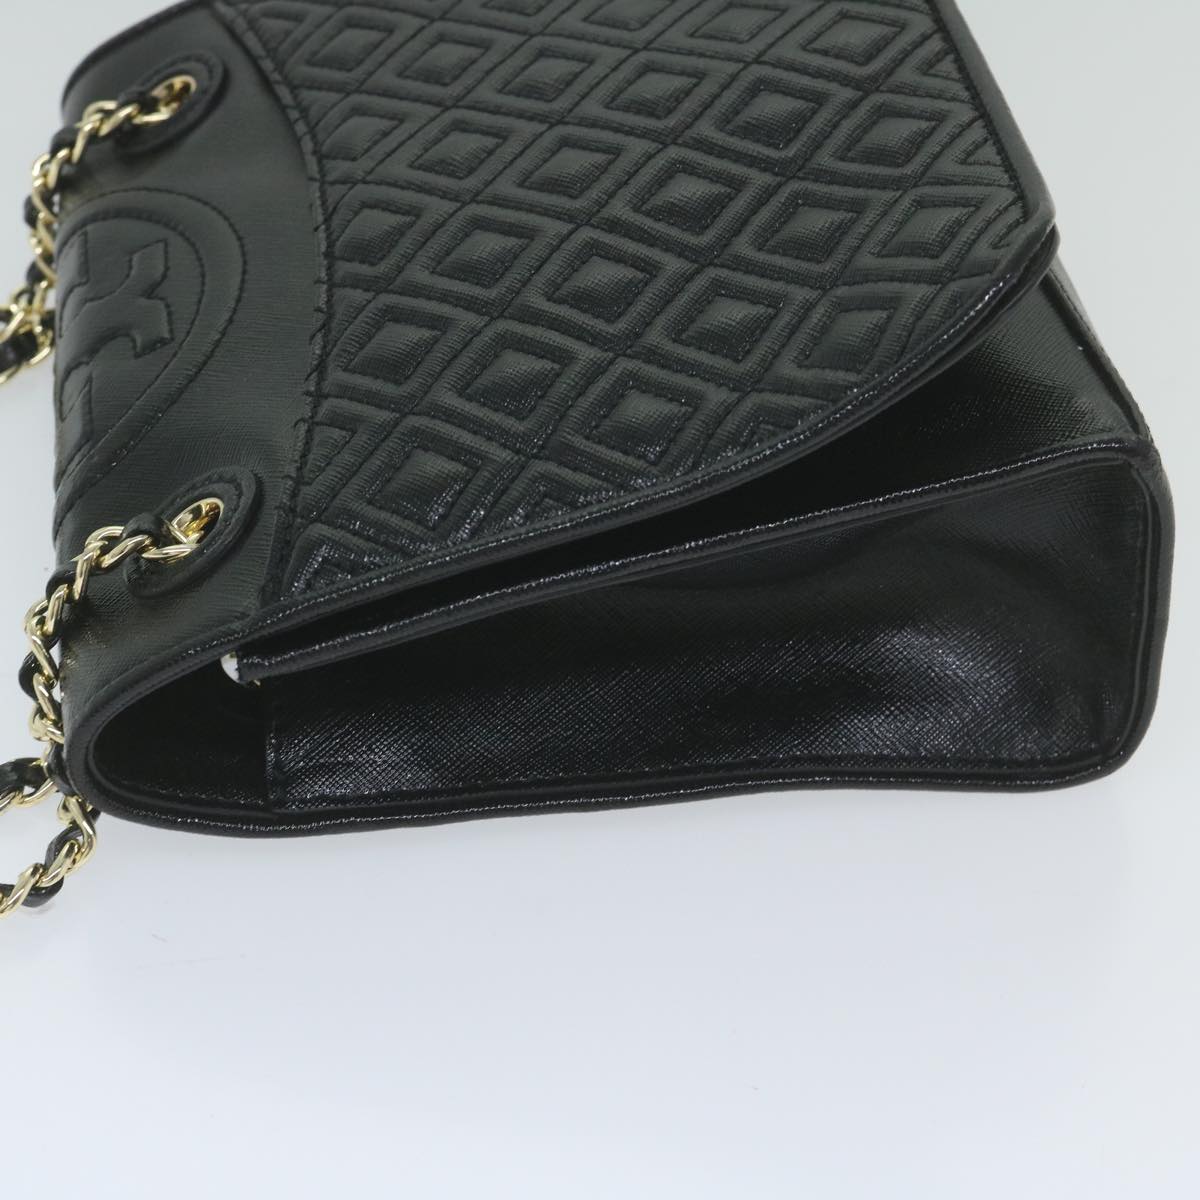 TORY BURCH Quilted Chain Shoulder Bag PVC Leather Black Auth am5283